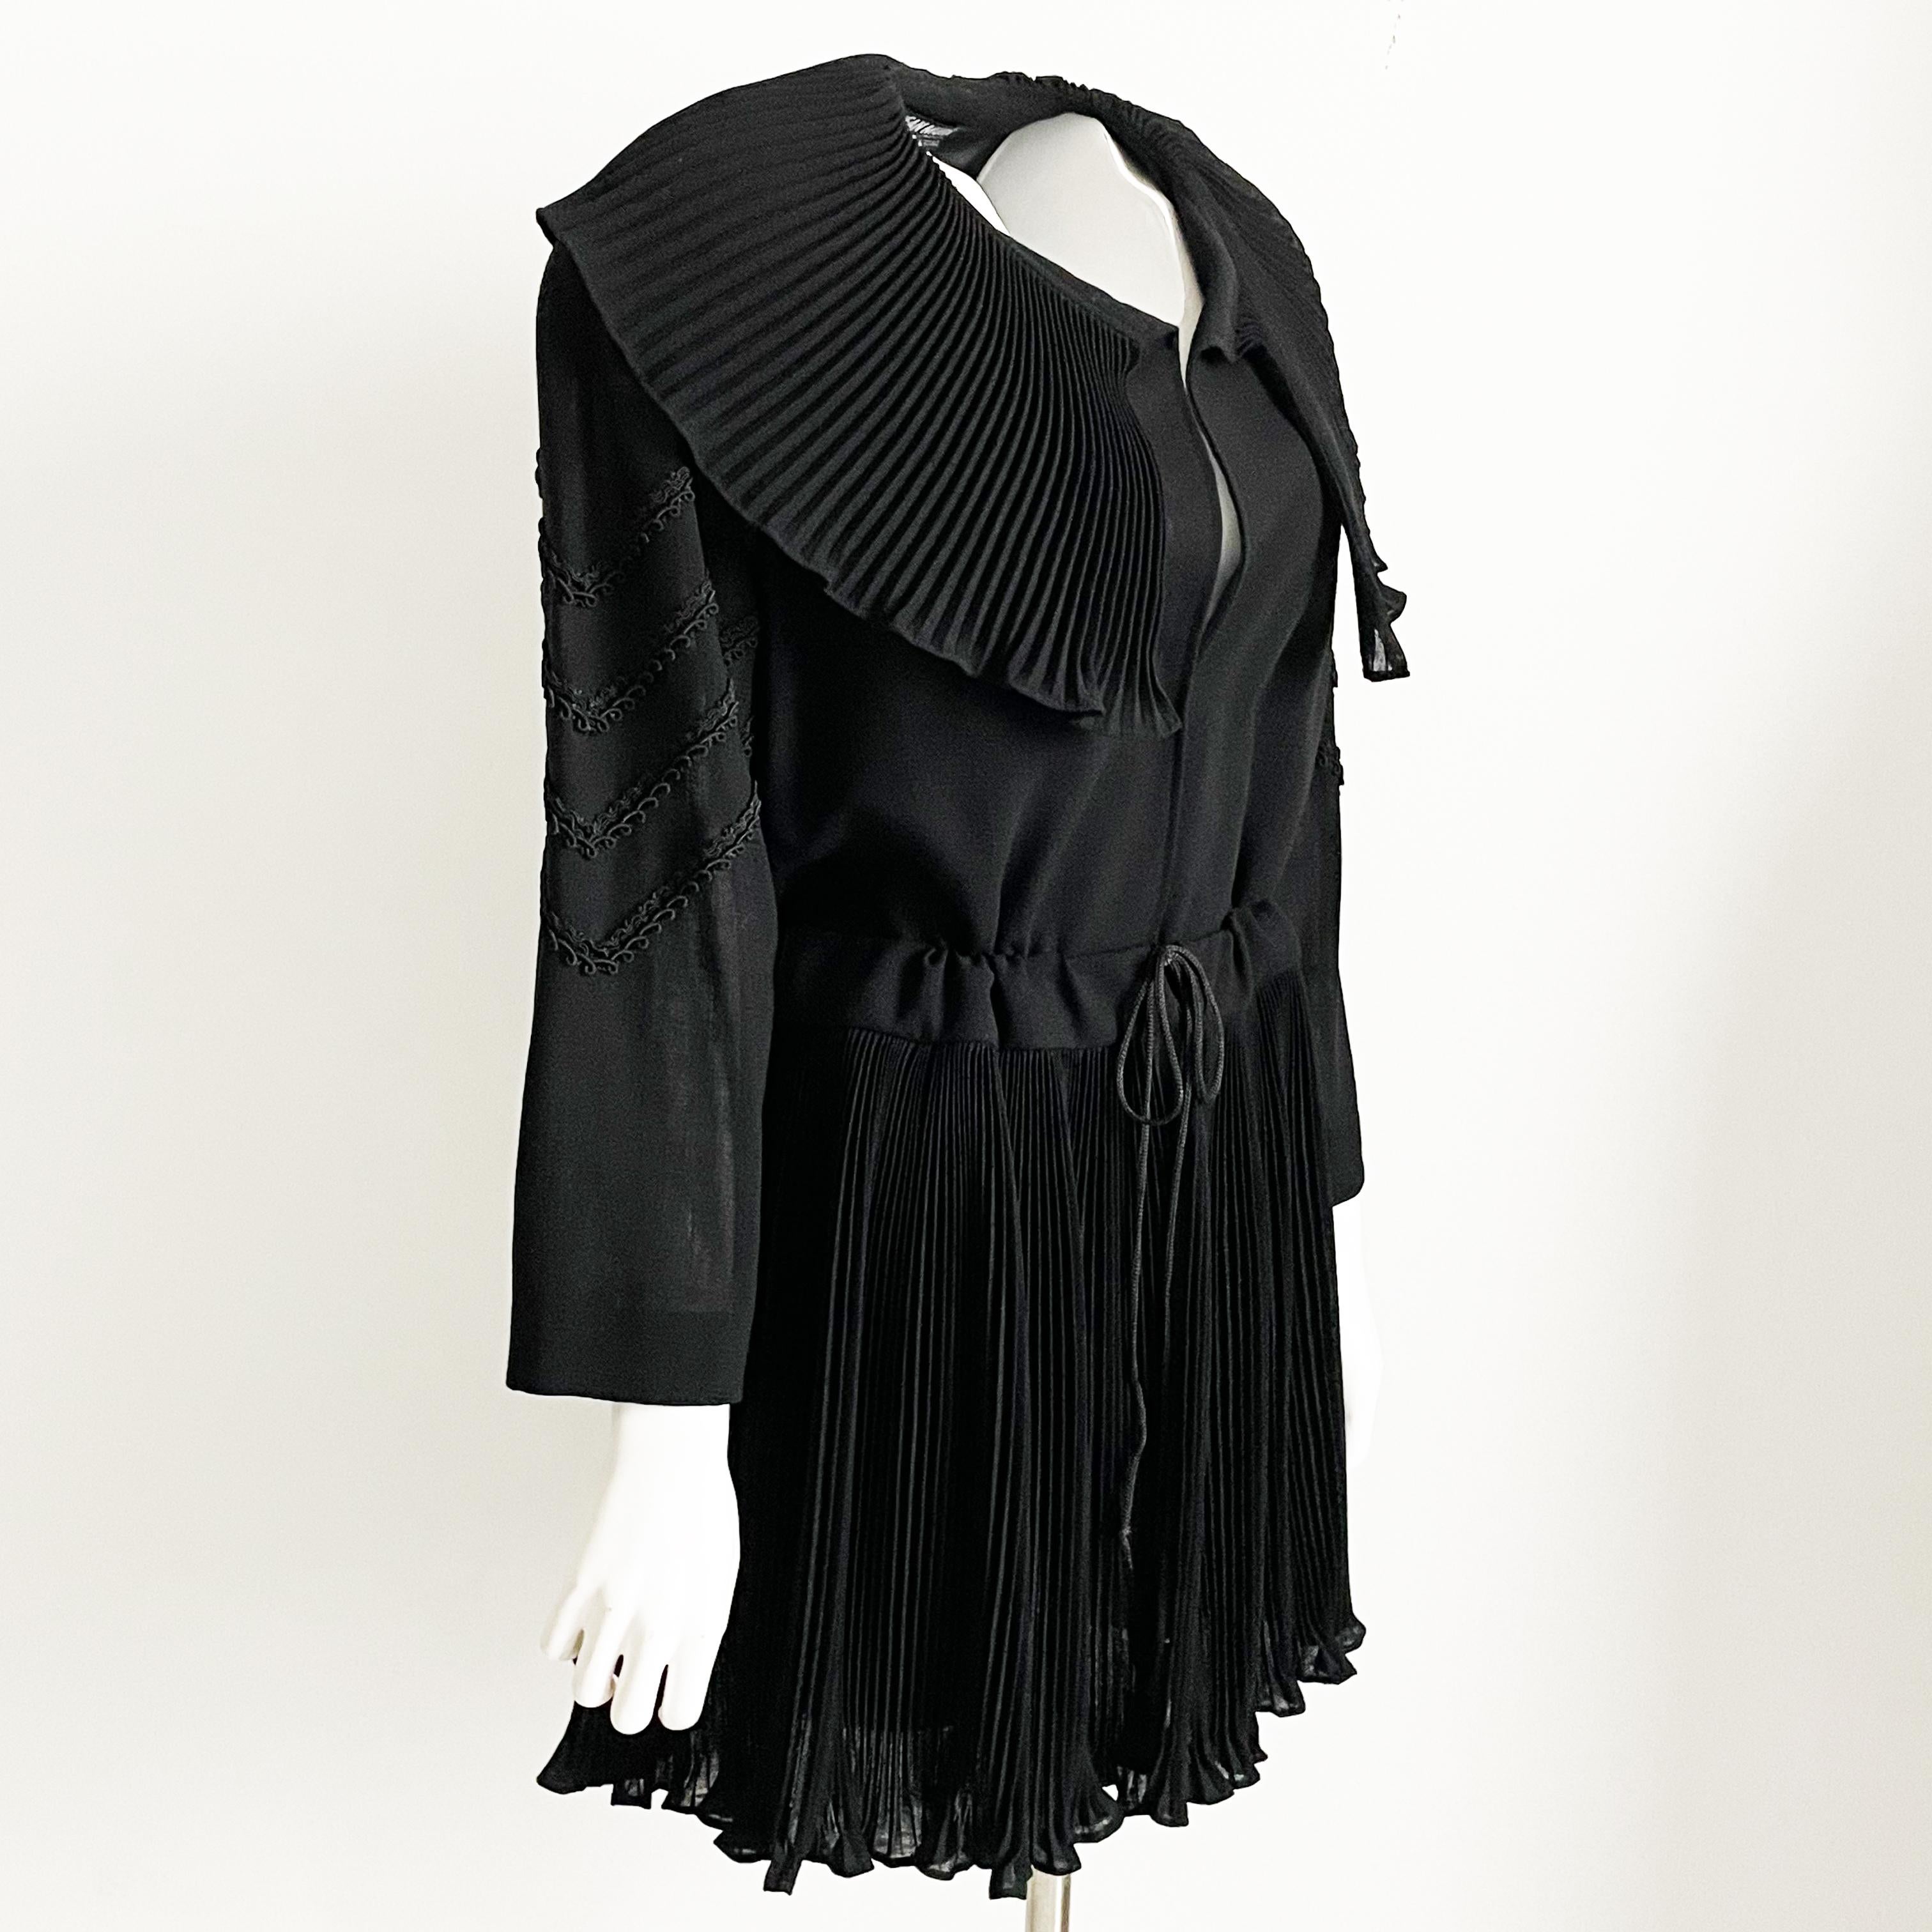 Authentic, preowned, vintage Jean Muir black wool jacket with micro pleat collar, likely made in the 80s. Romantic and sophisticated, it features a micro-pleated collar and hem, with Soutache detailing on the sheer crepe sleeves. 

Made in England. 